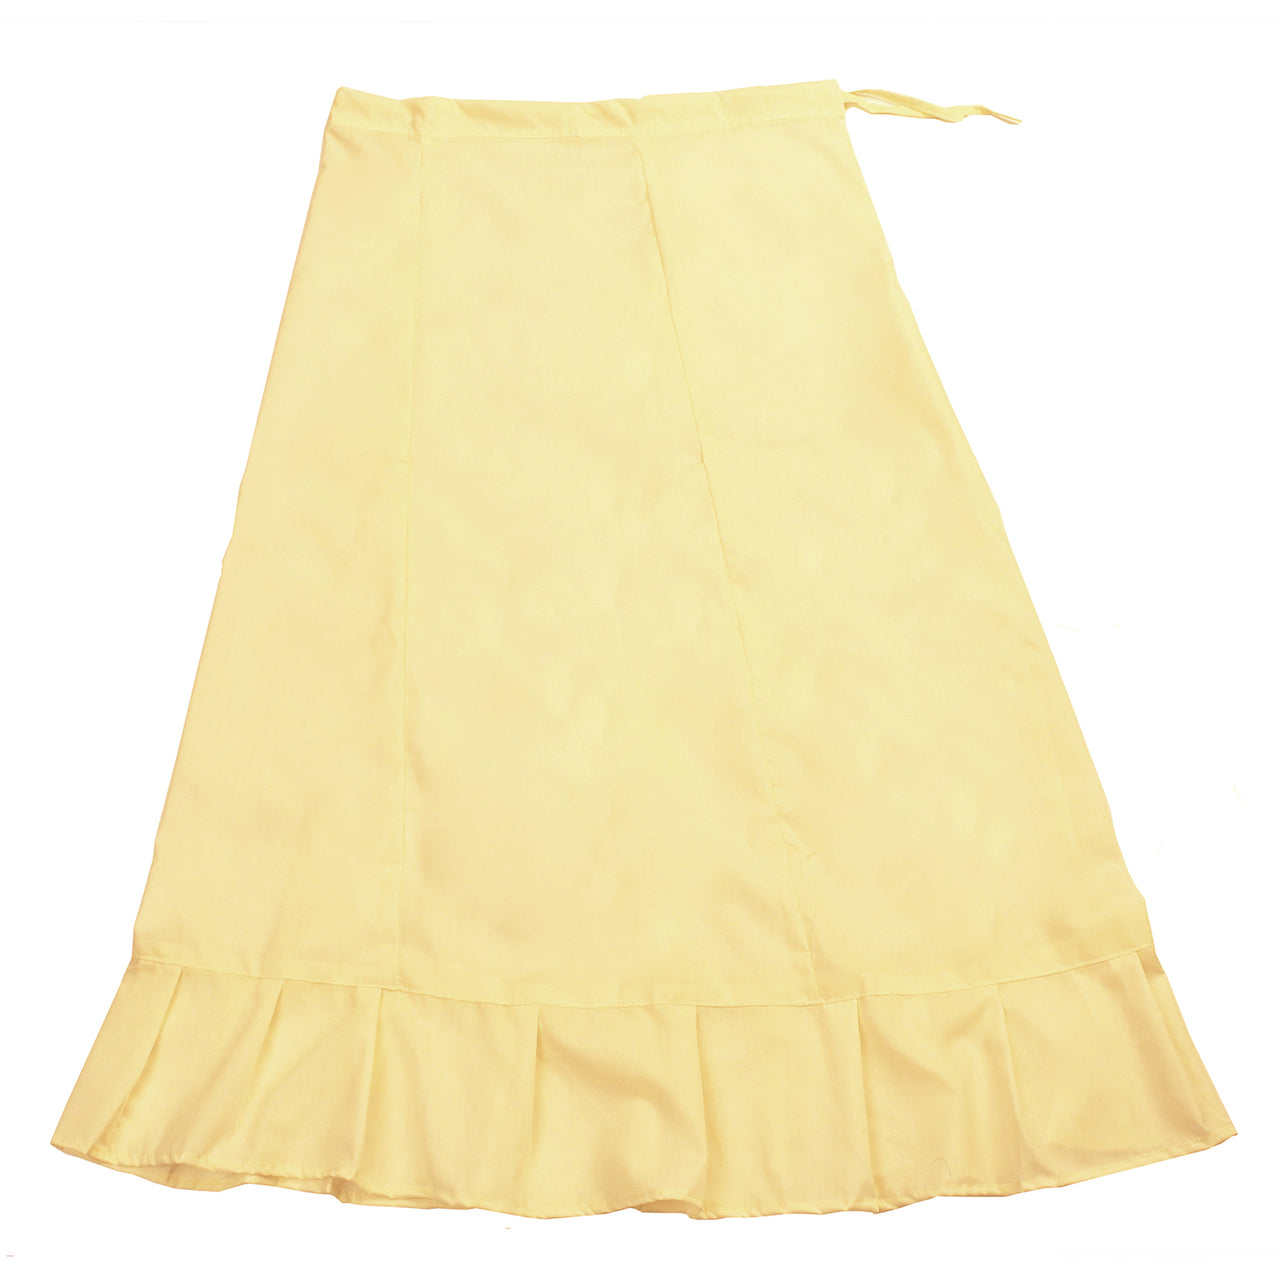 Ivory - Sari (Saree) Petticoat - Available in S, M, L & XL - Underskirts For Sari's